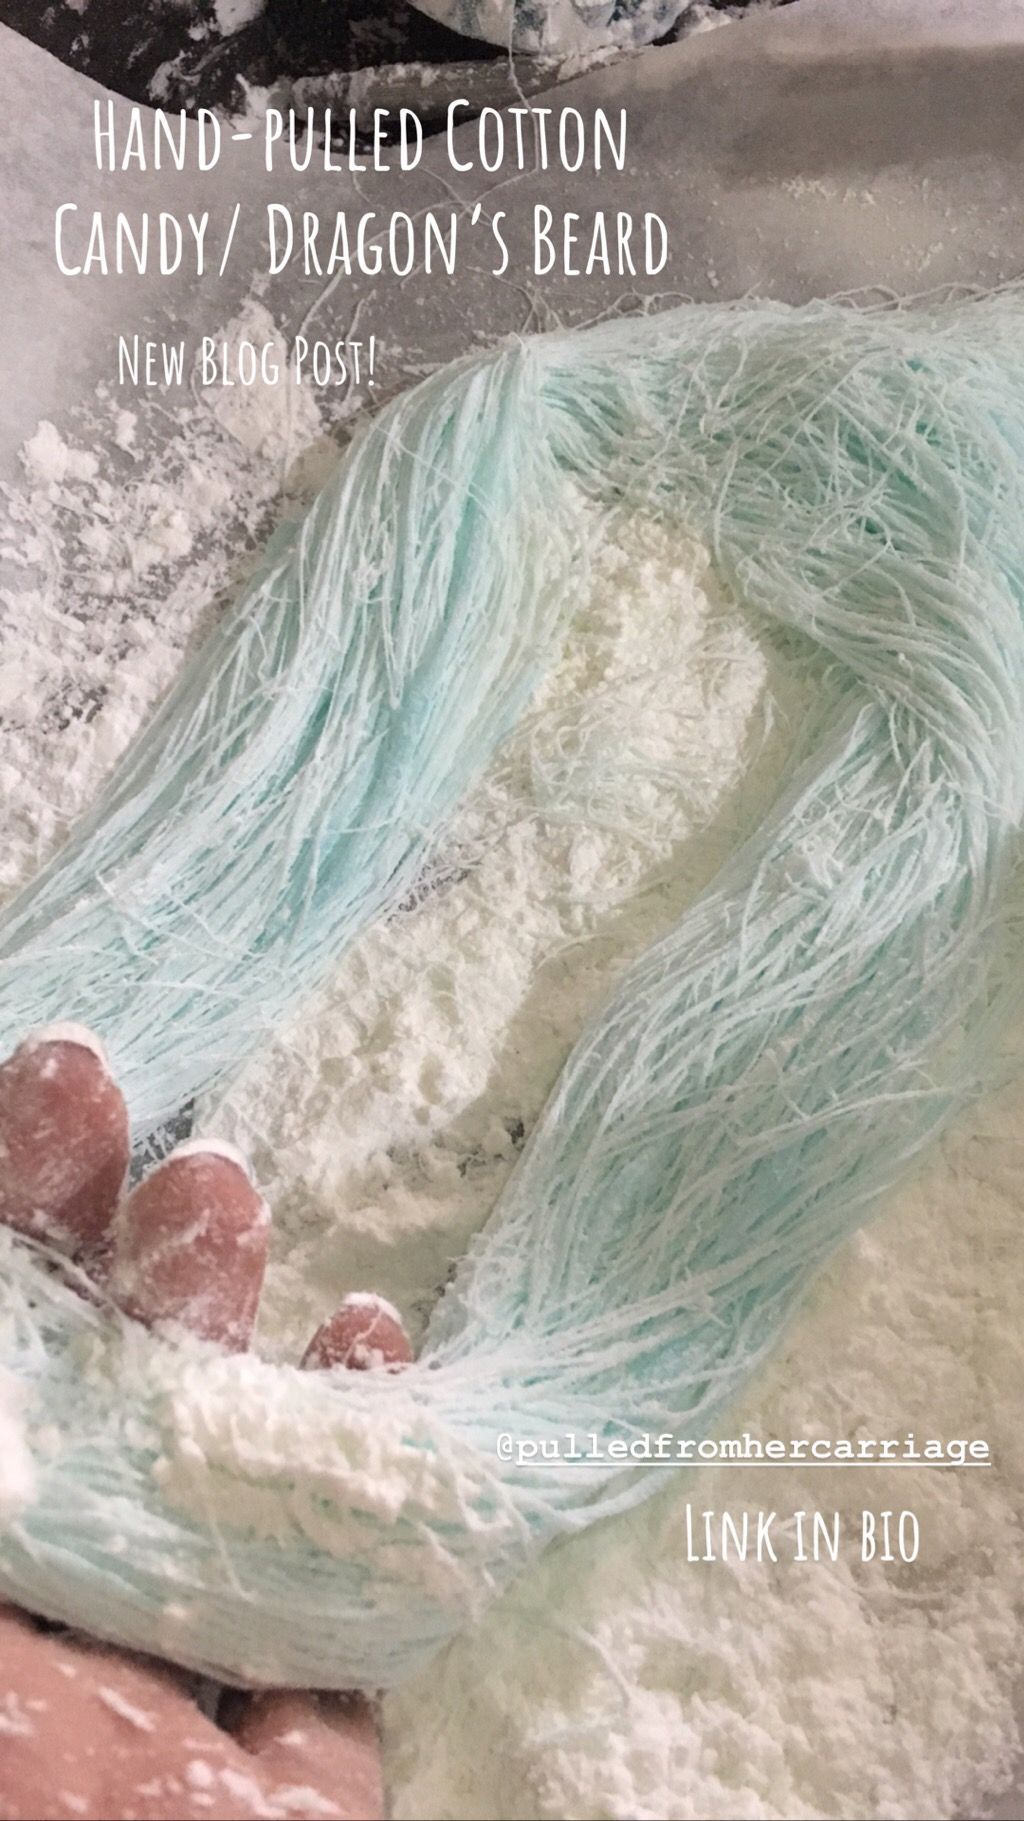 Hand-Pulled Cotton Candy: Dragon's Beard - Pulled From Her Carriage - Hand-Pulled Cotton Candy: Dragon's Beard - Pulled From Her Carriage -   17 diy Food candy ideas